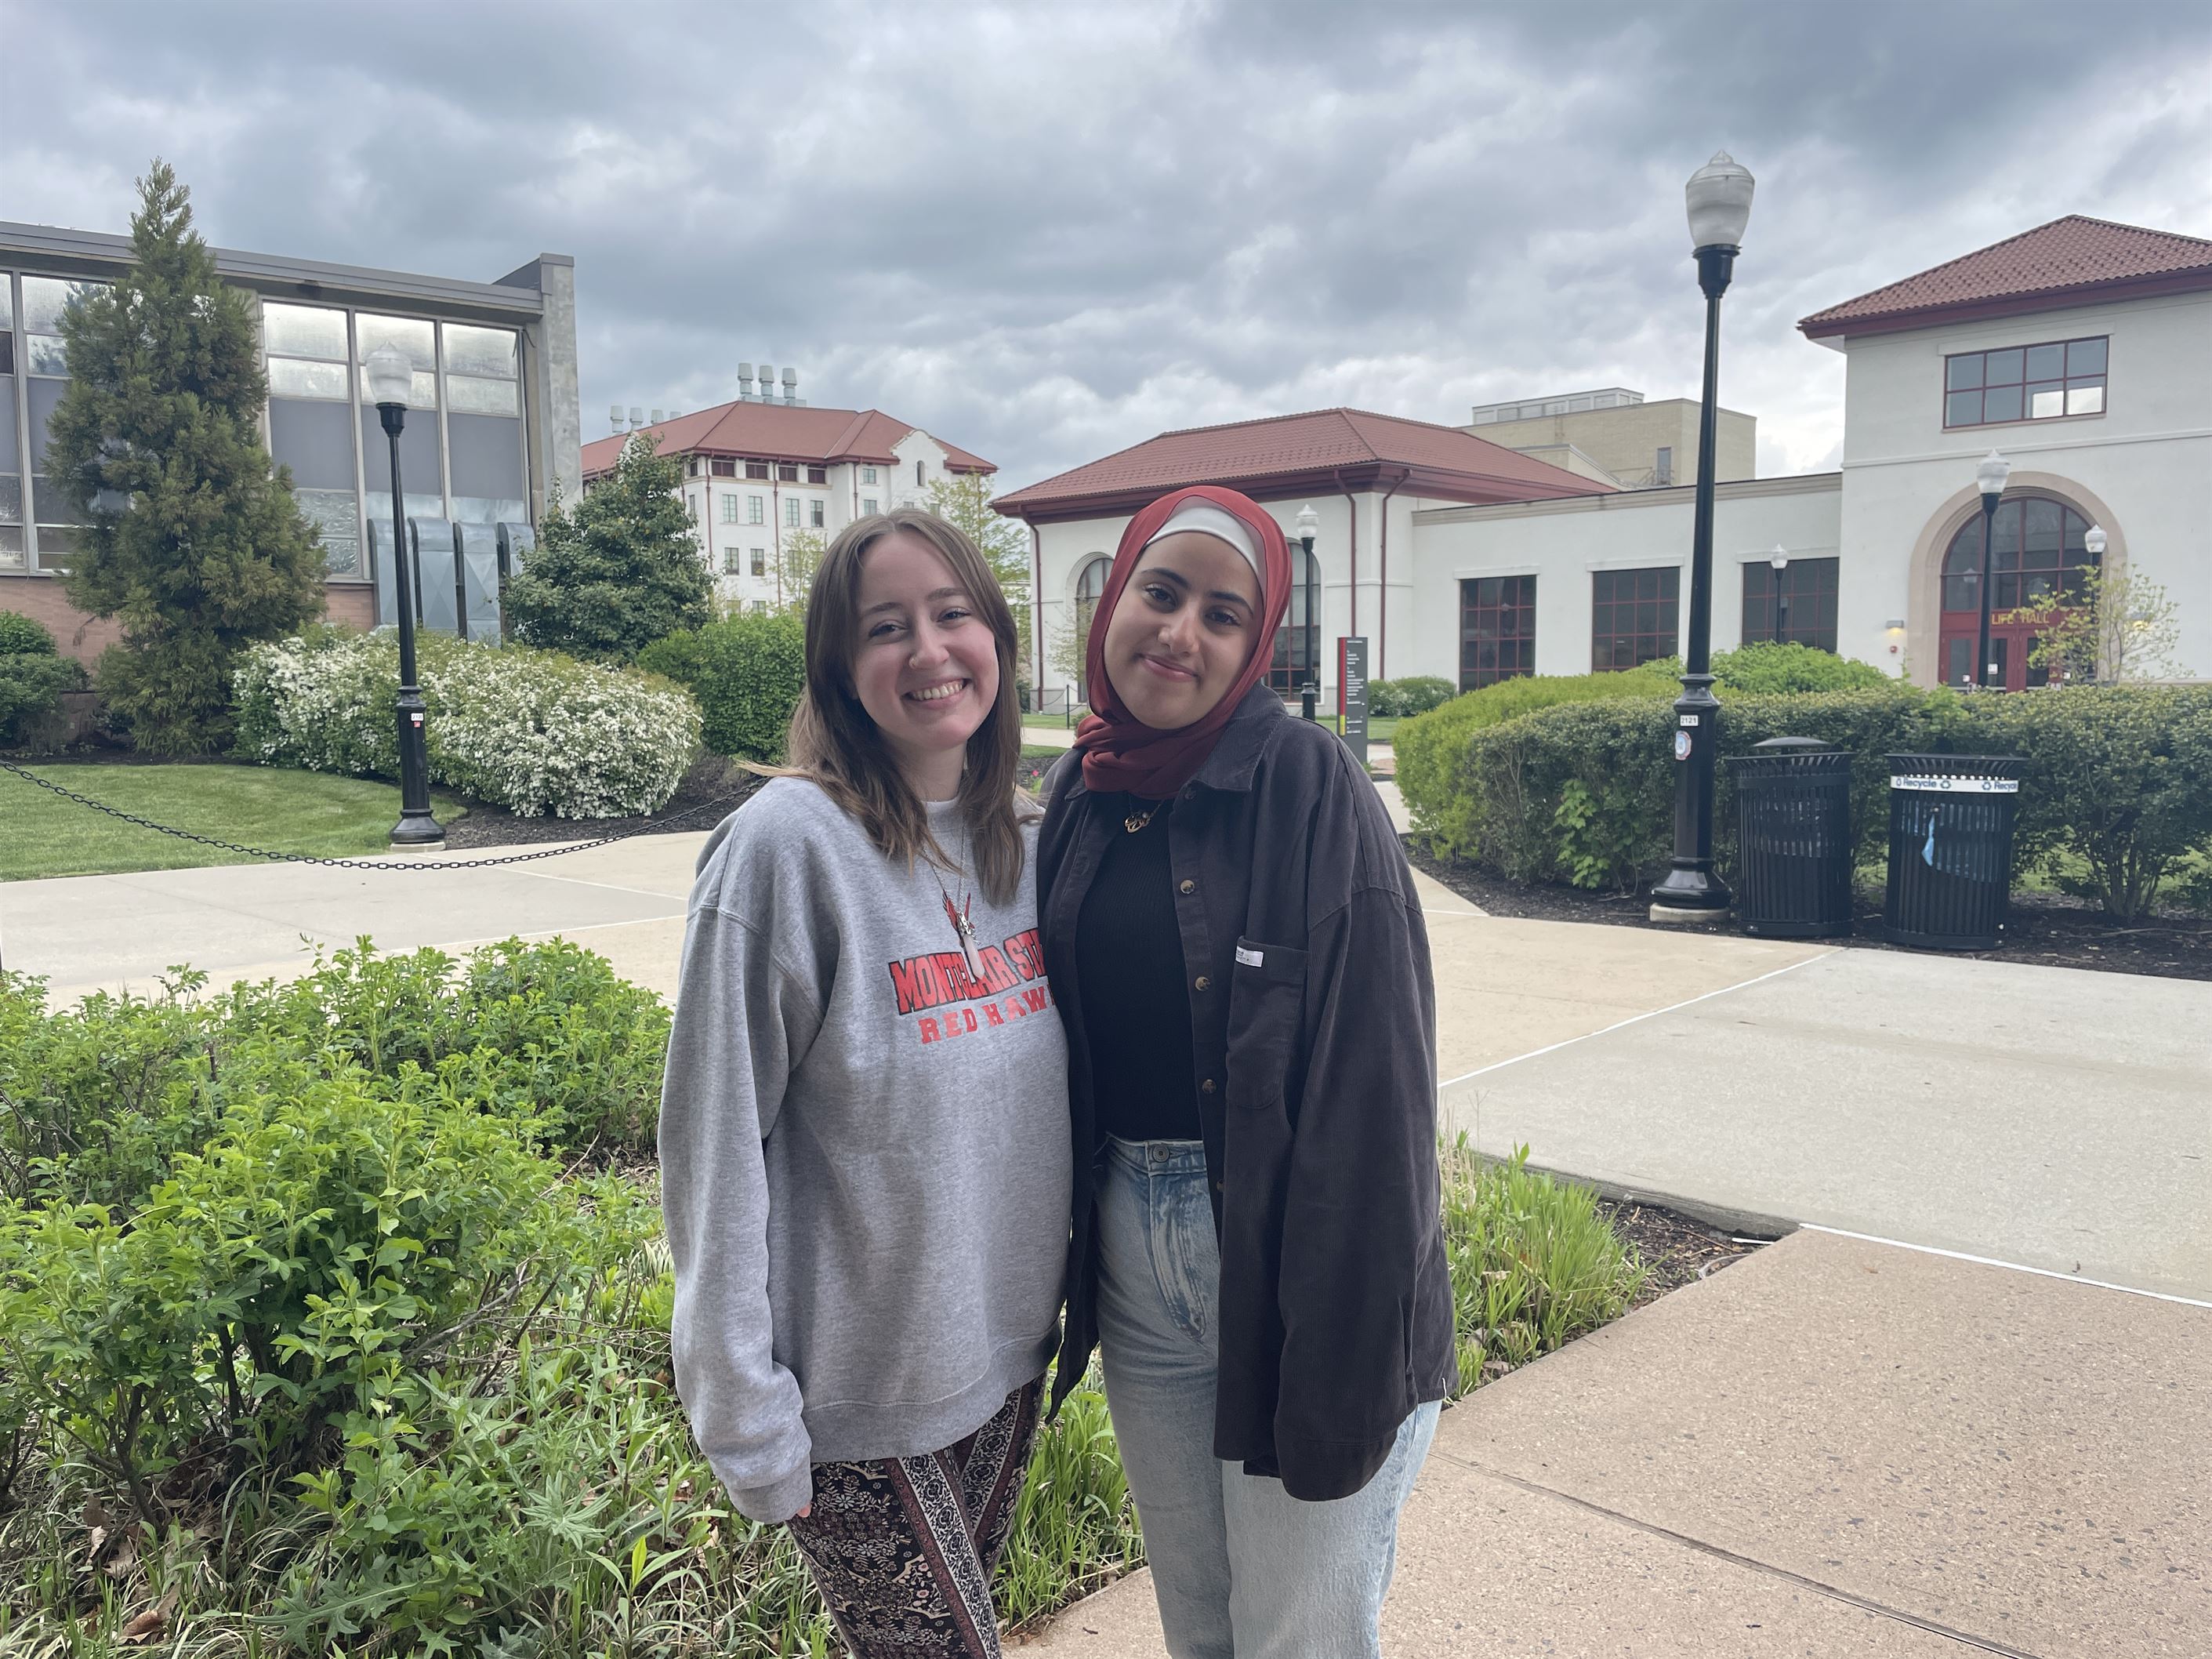 Alana Beshaw (left) and Noor Alalwan (right) are looking forward to the new opportunities at Montclair State University.